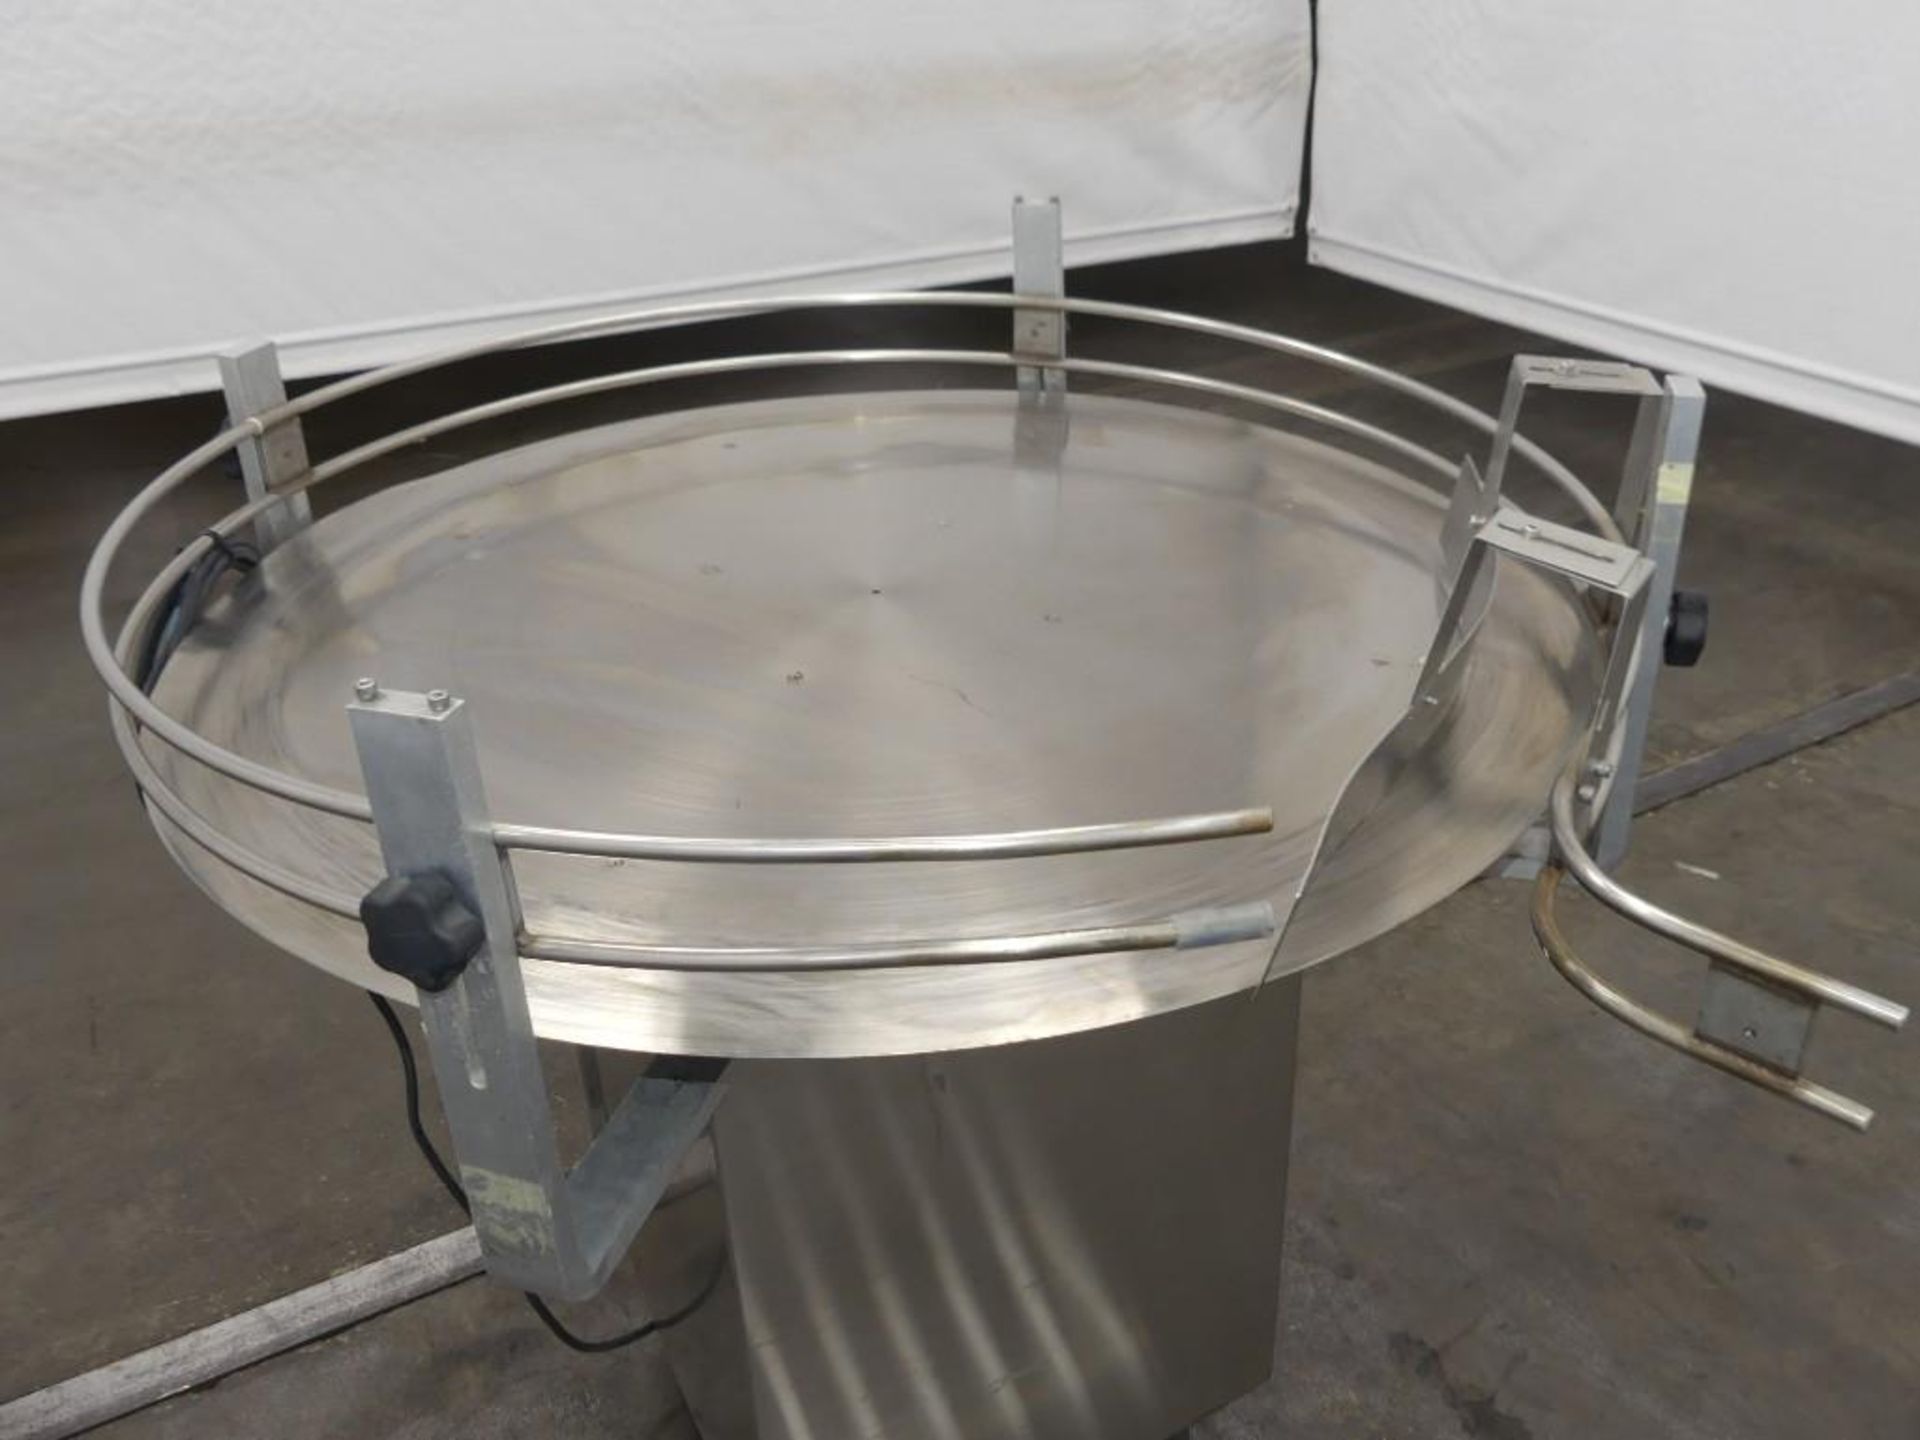 Axus 44" Stainless Steel Rotary Accumulation Table - Image 4 of 9